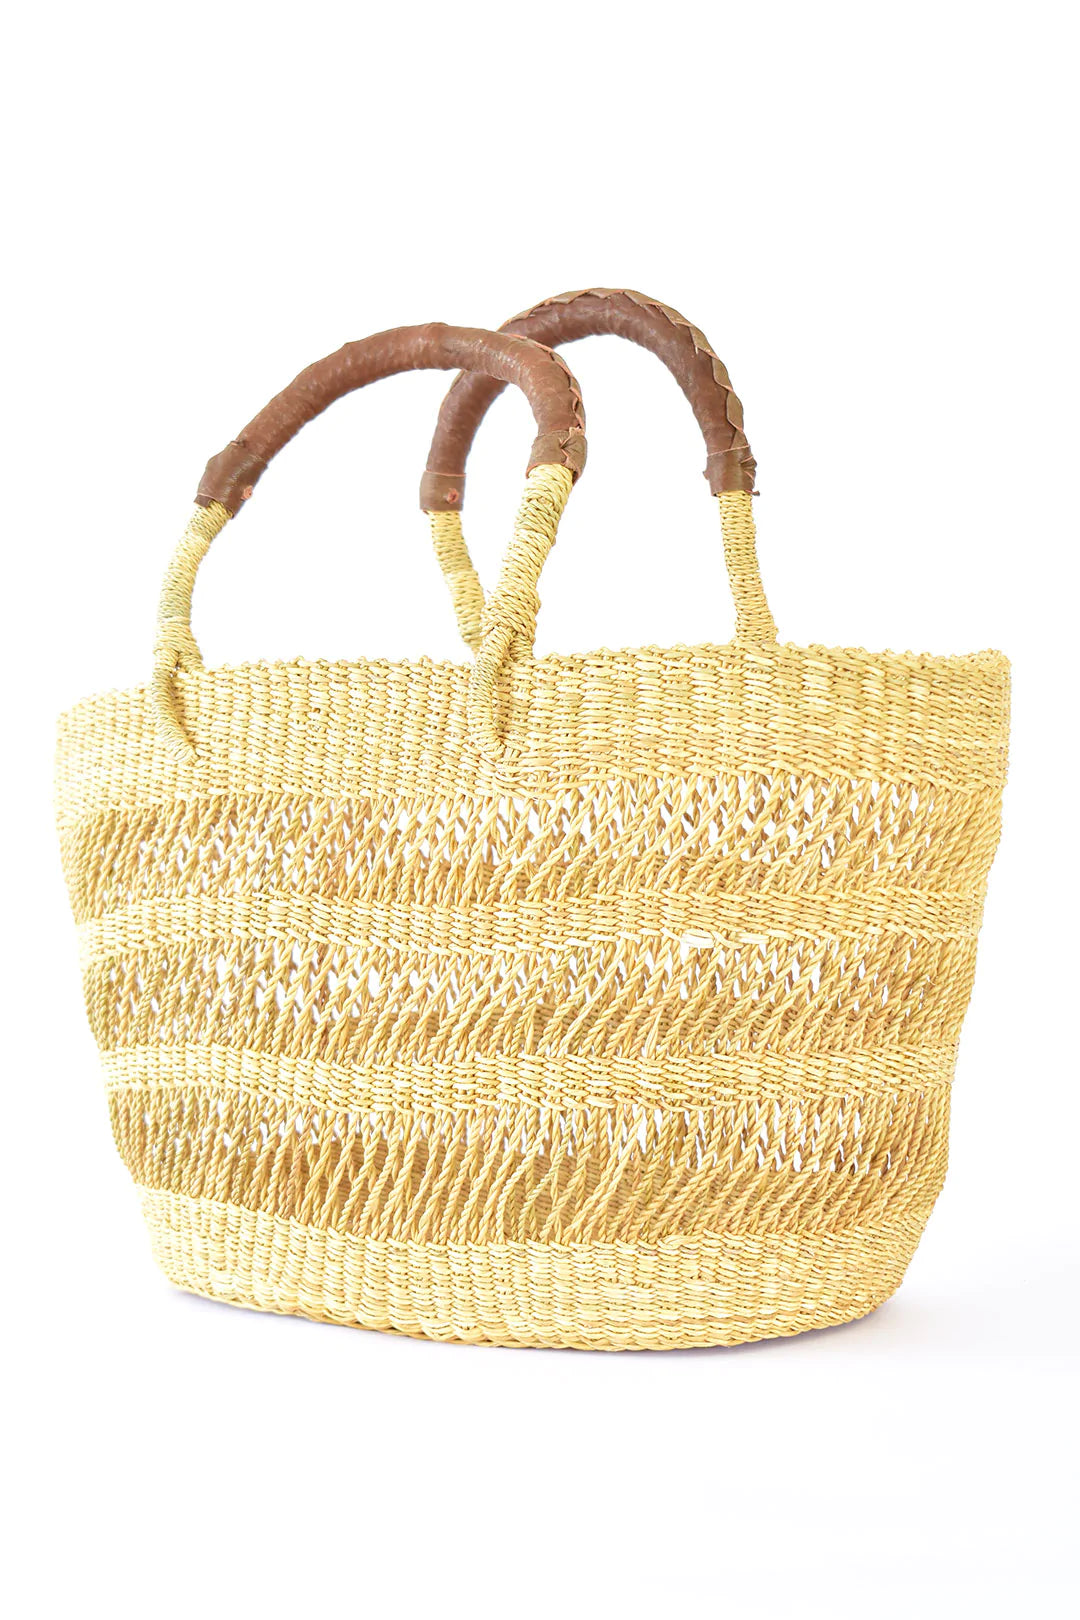 Travel Tote - Lace Weave with Leather Handle - Market Basket